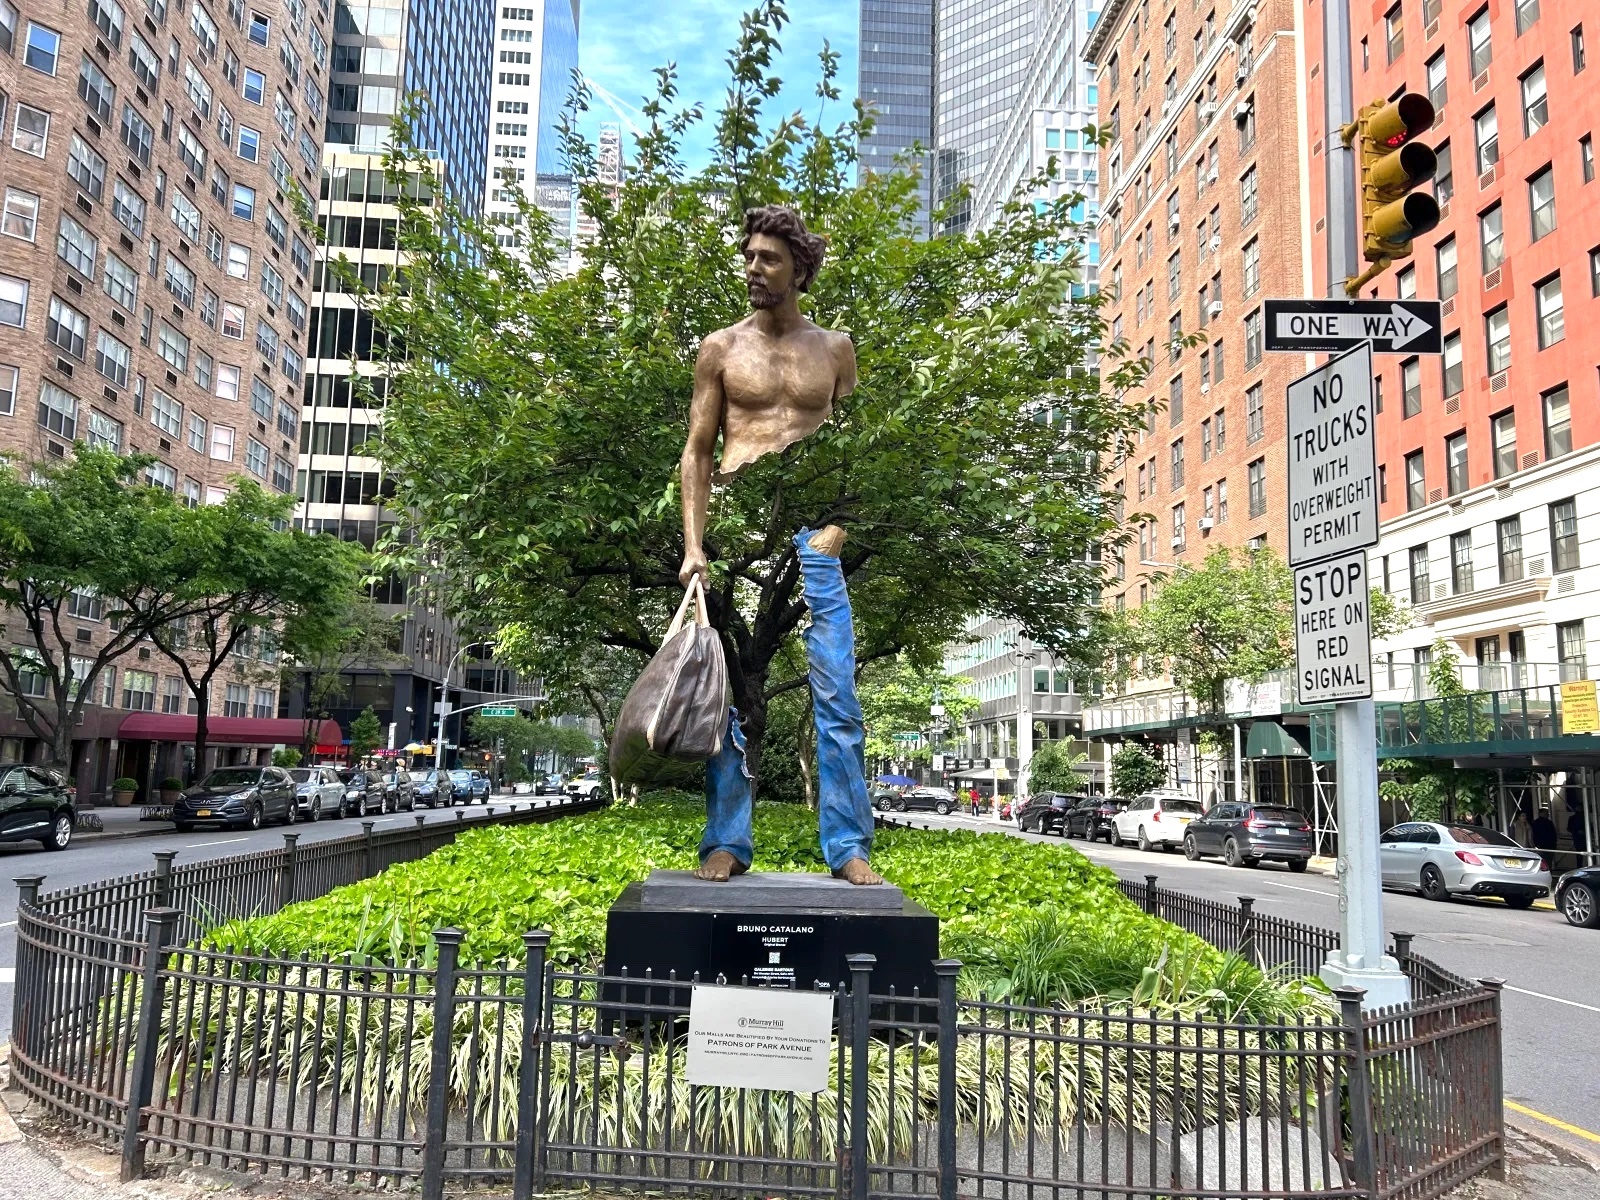 These trippy sculptures of people in Manhattan will make you do a double take